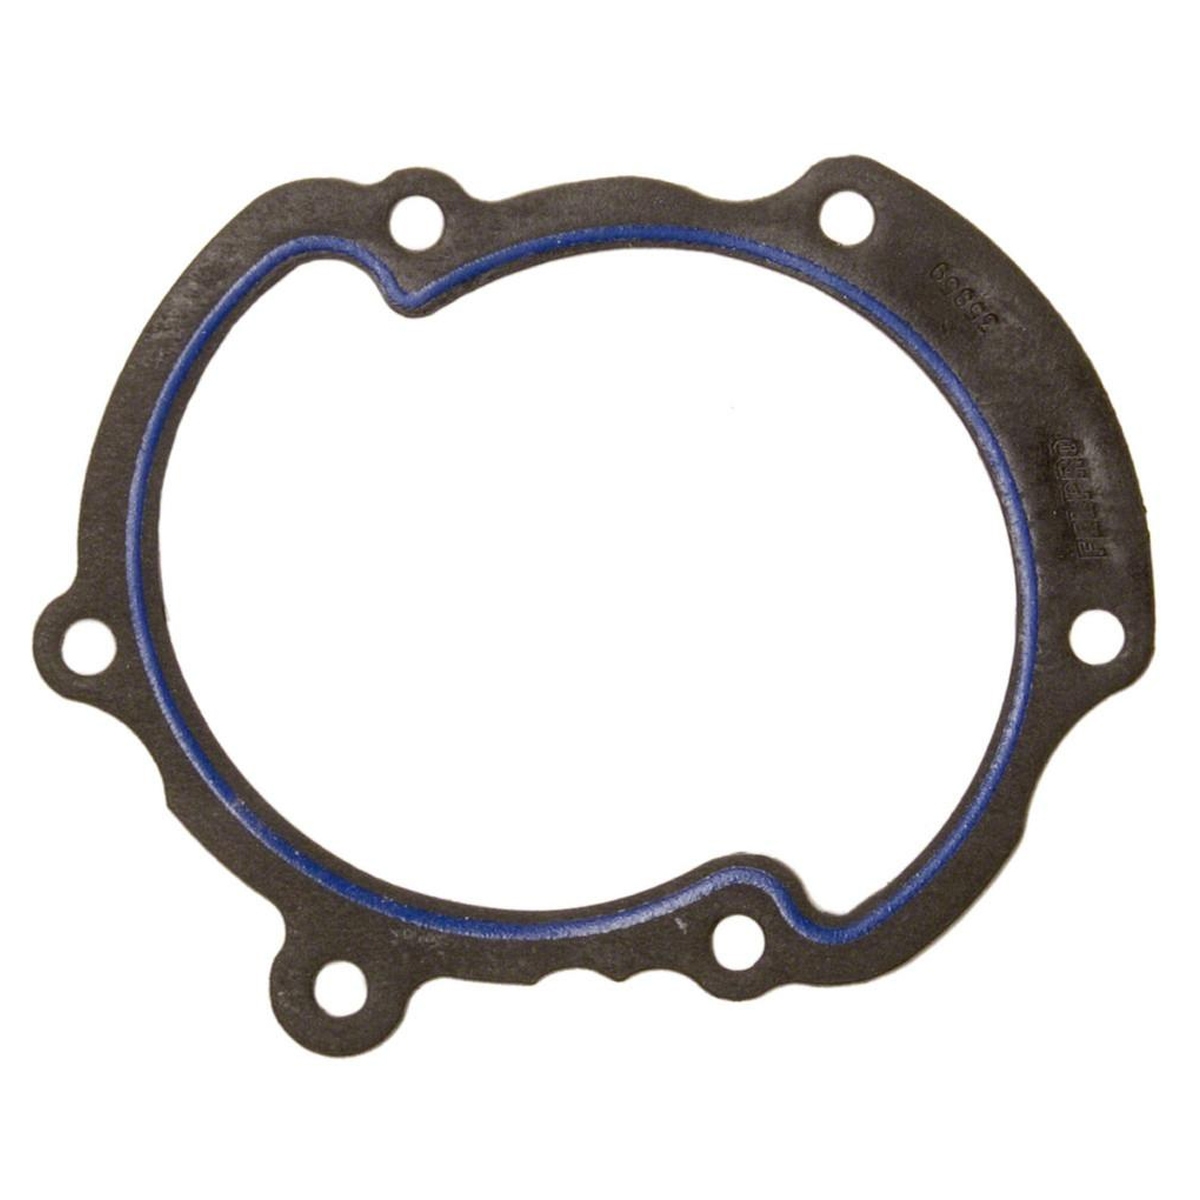 VAUXHALL AND OPEL ROYALE Water Pump Gasket